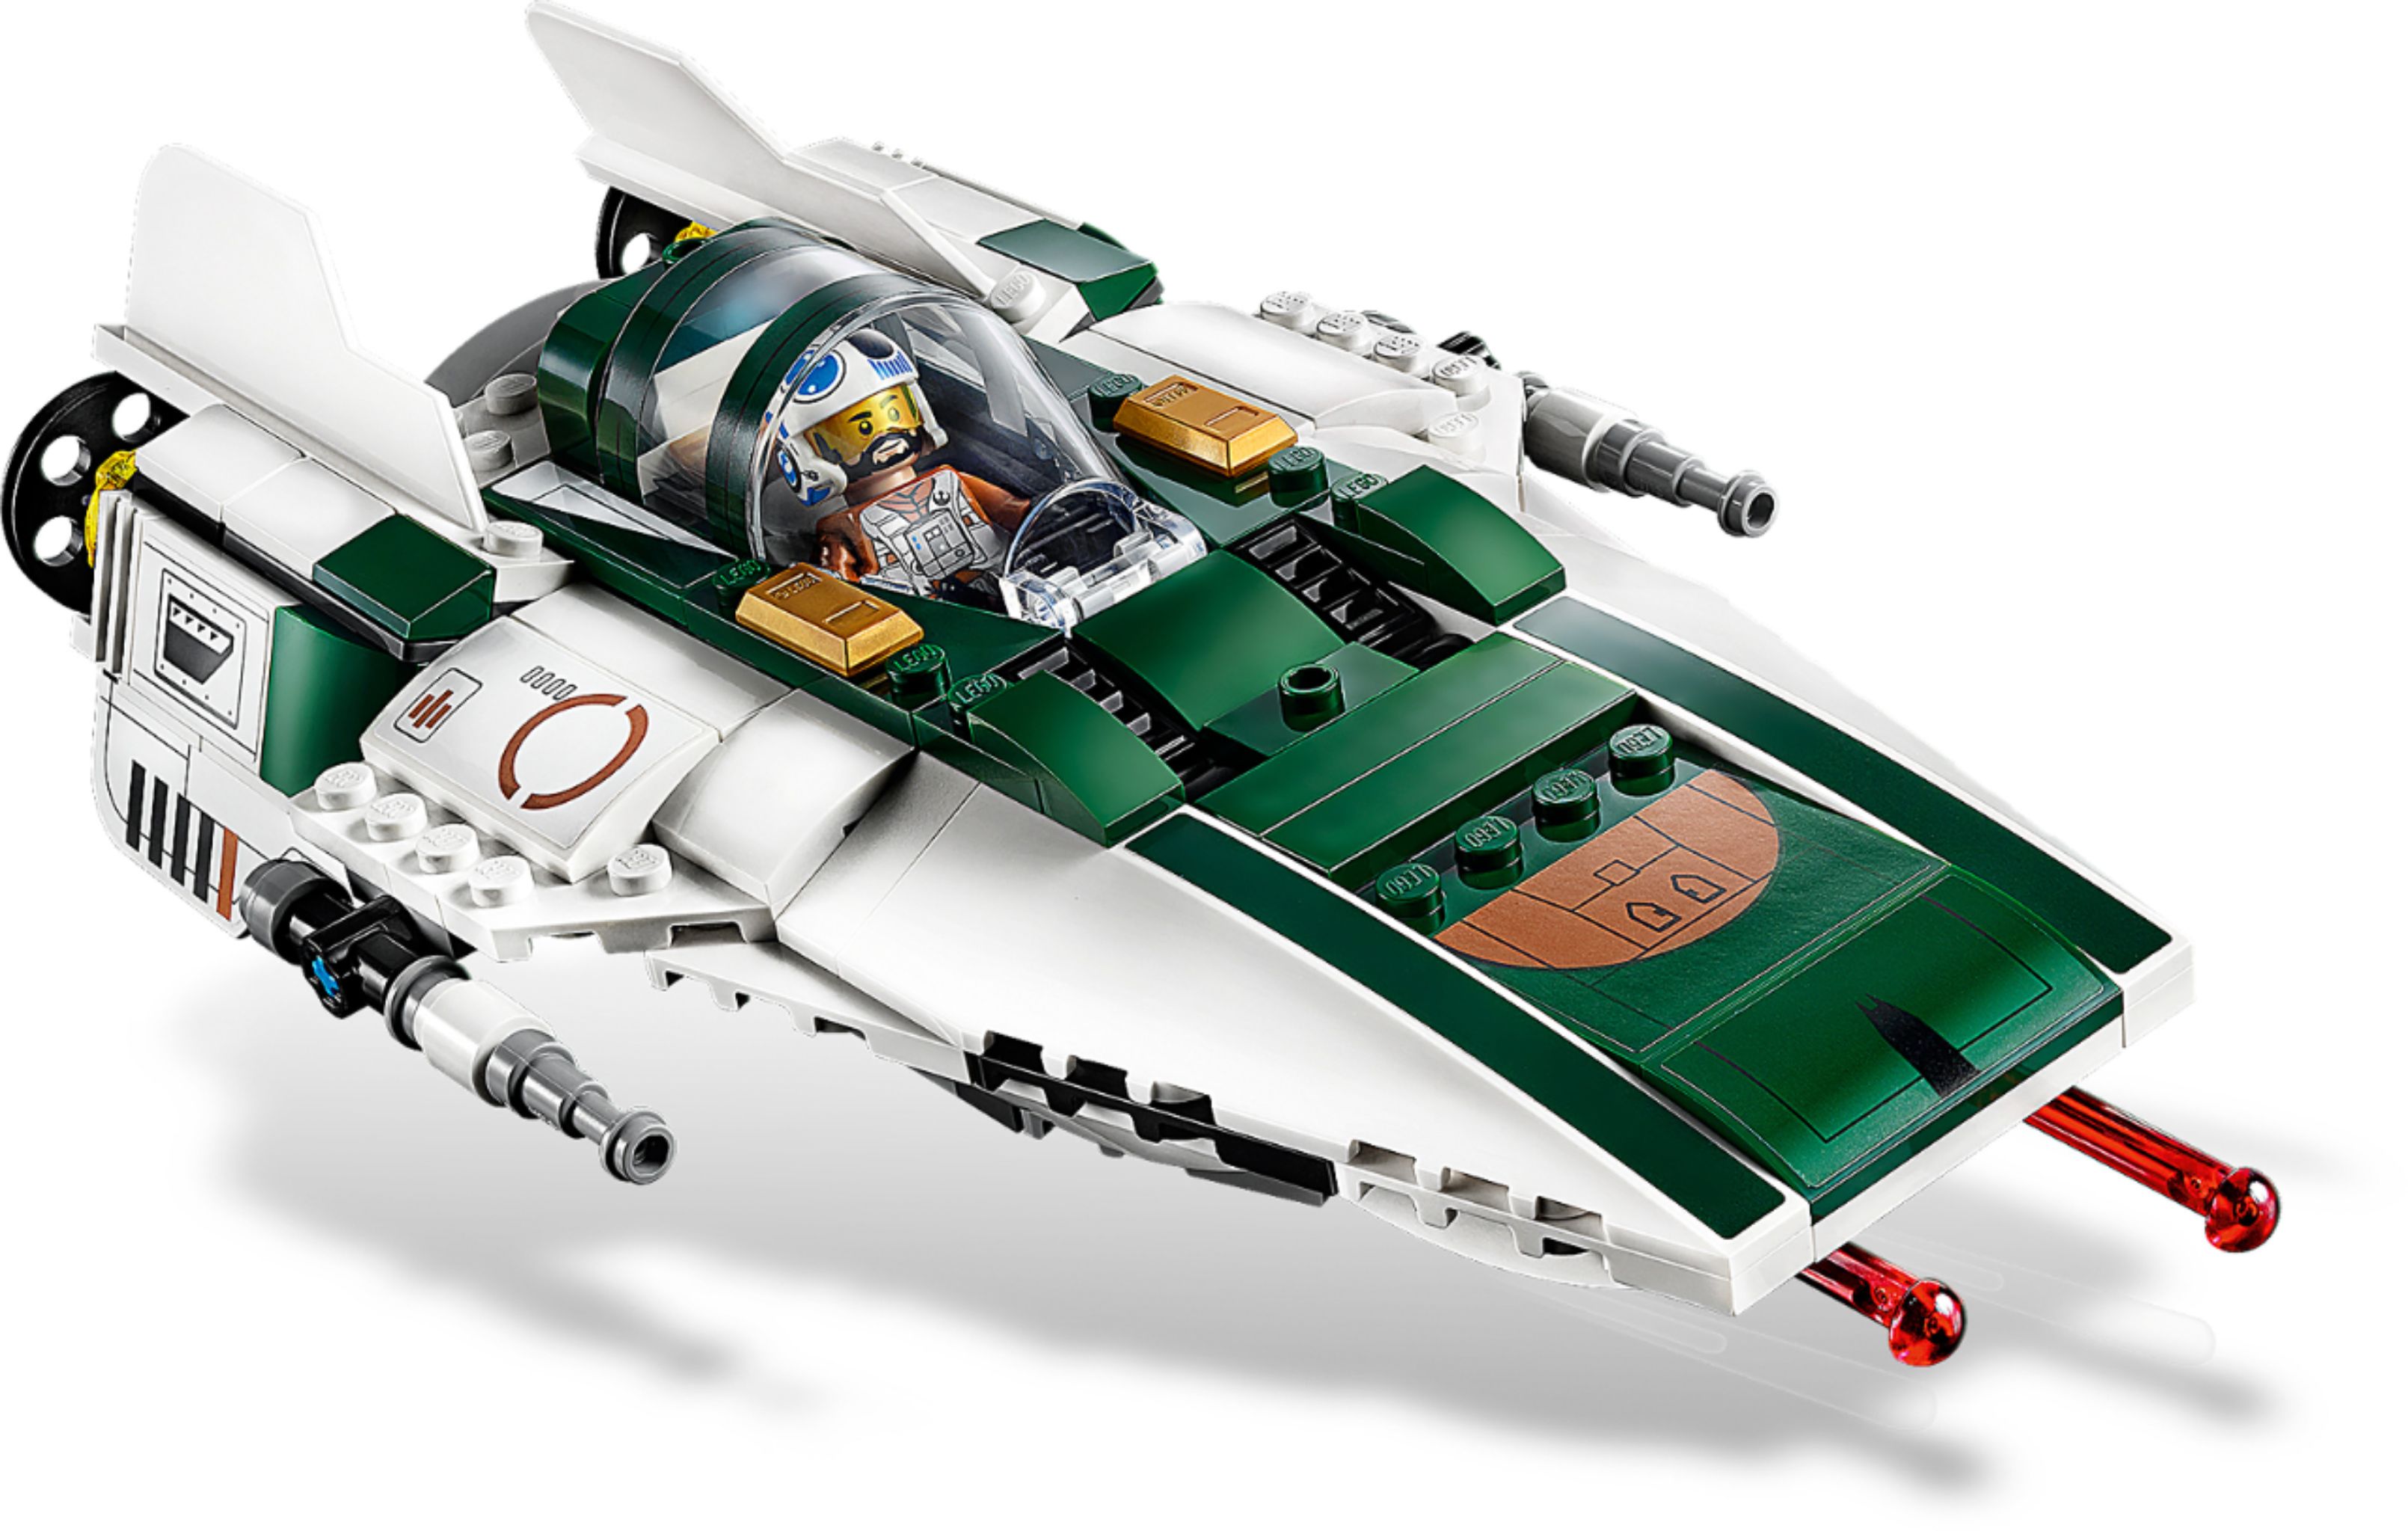 lego star wars resistance a wing